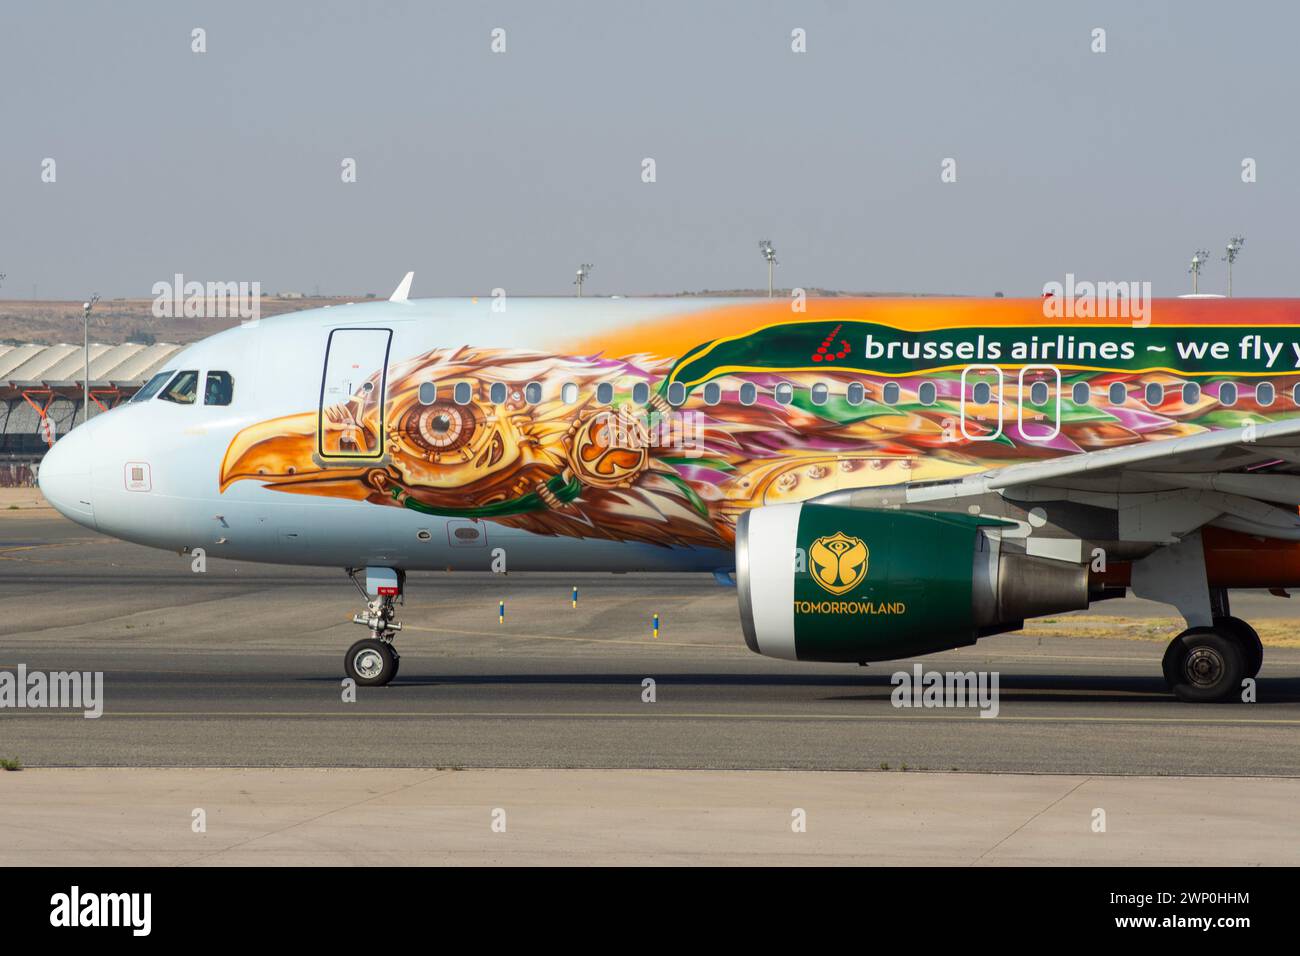 Brussels Airlines Airbus A320 airliner with special decoration Stock Photo